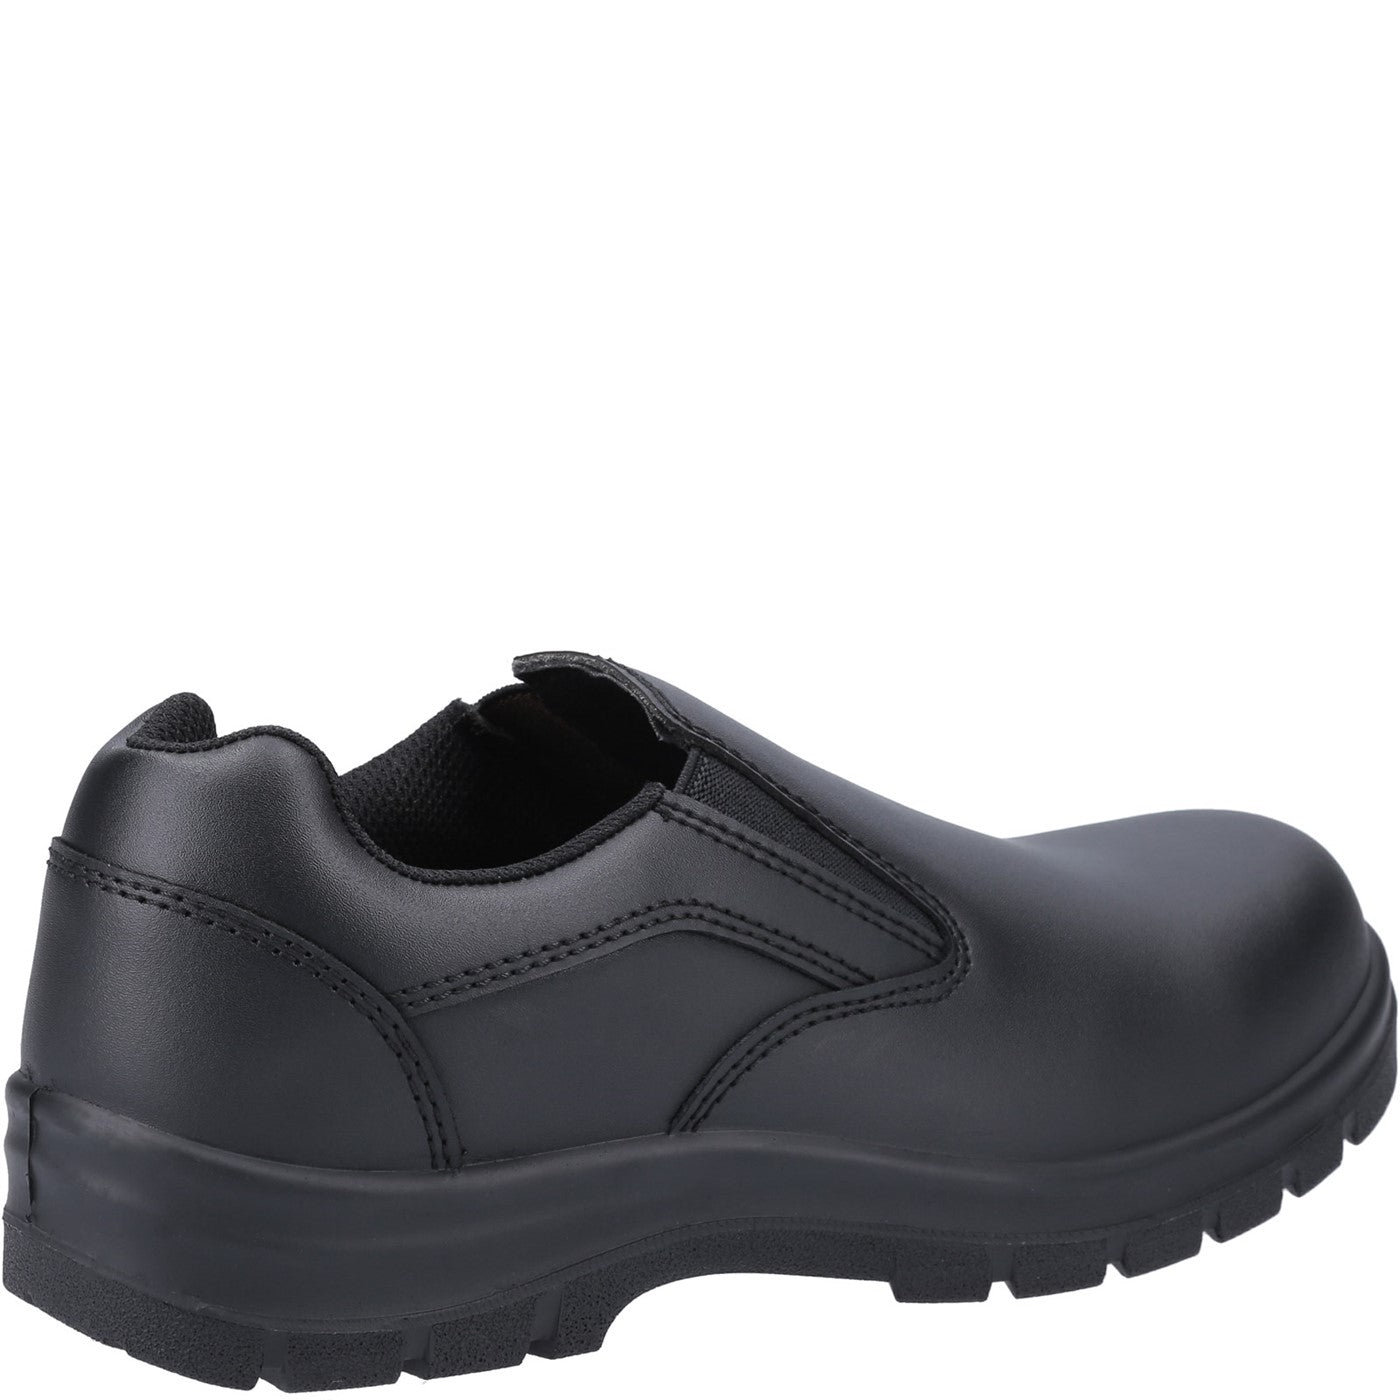 Women's Amblers Safety AS716C Safety Shoes